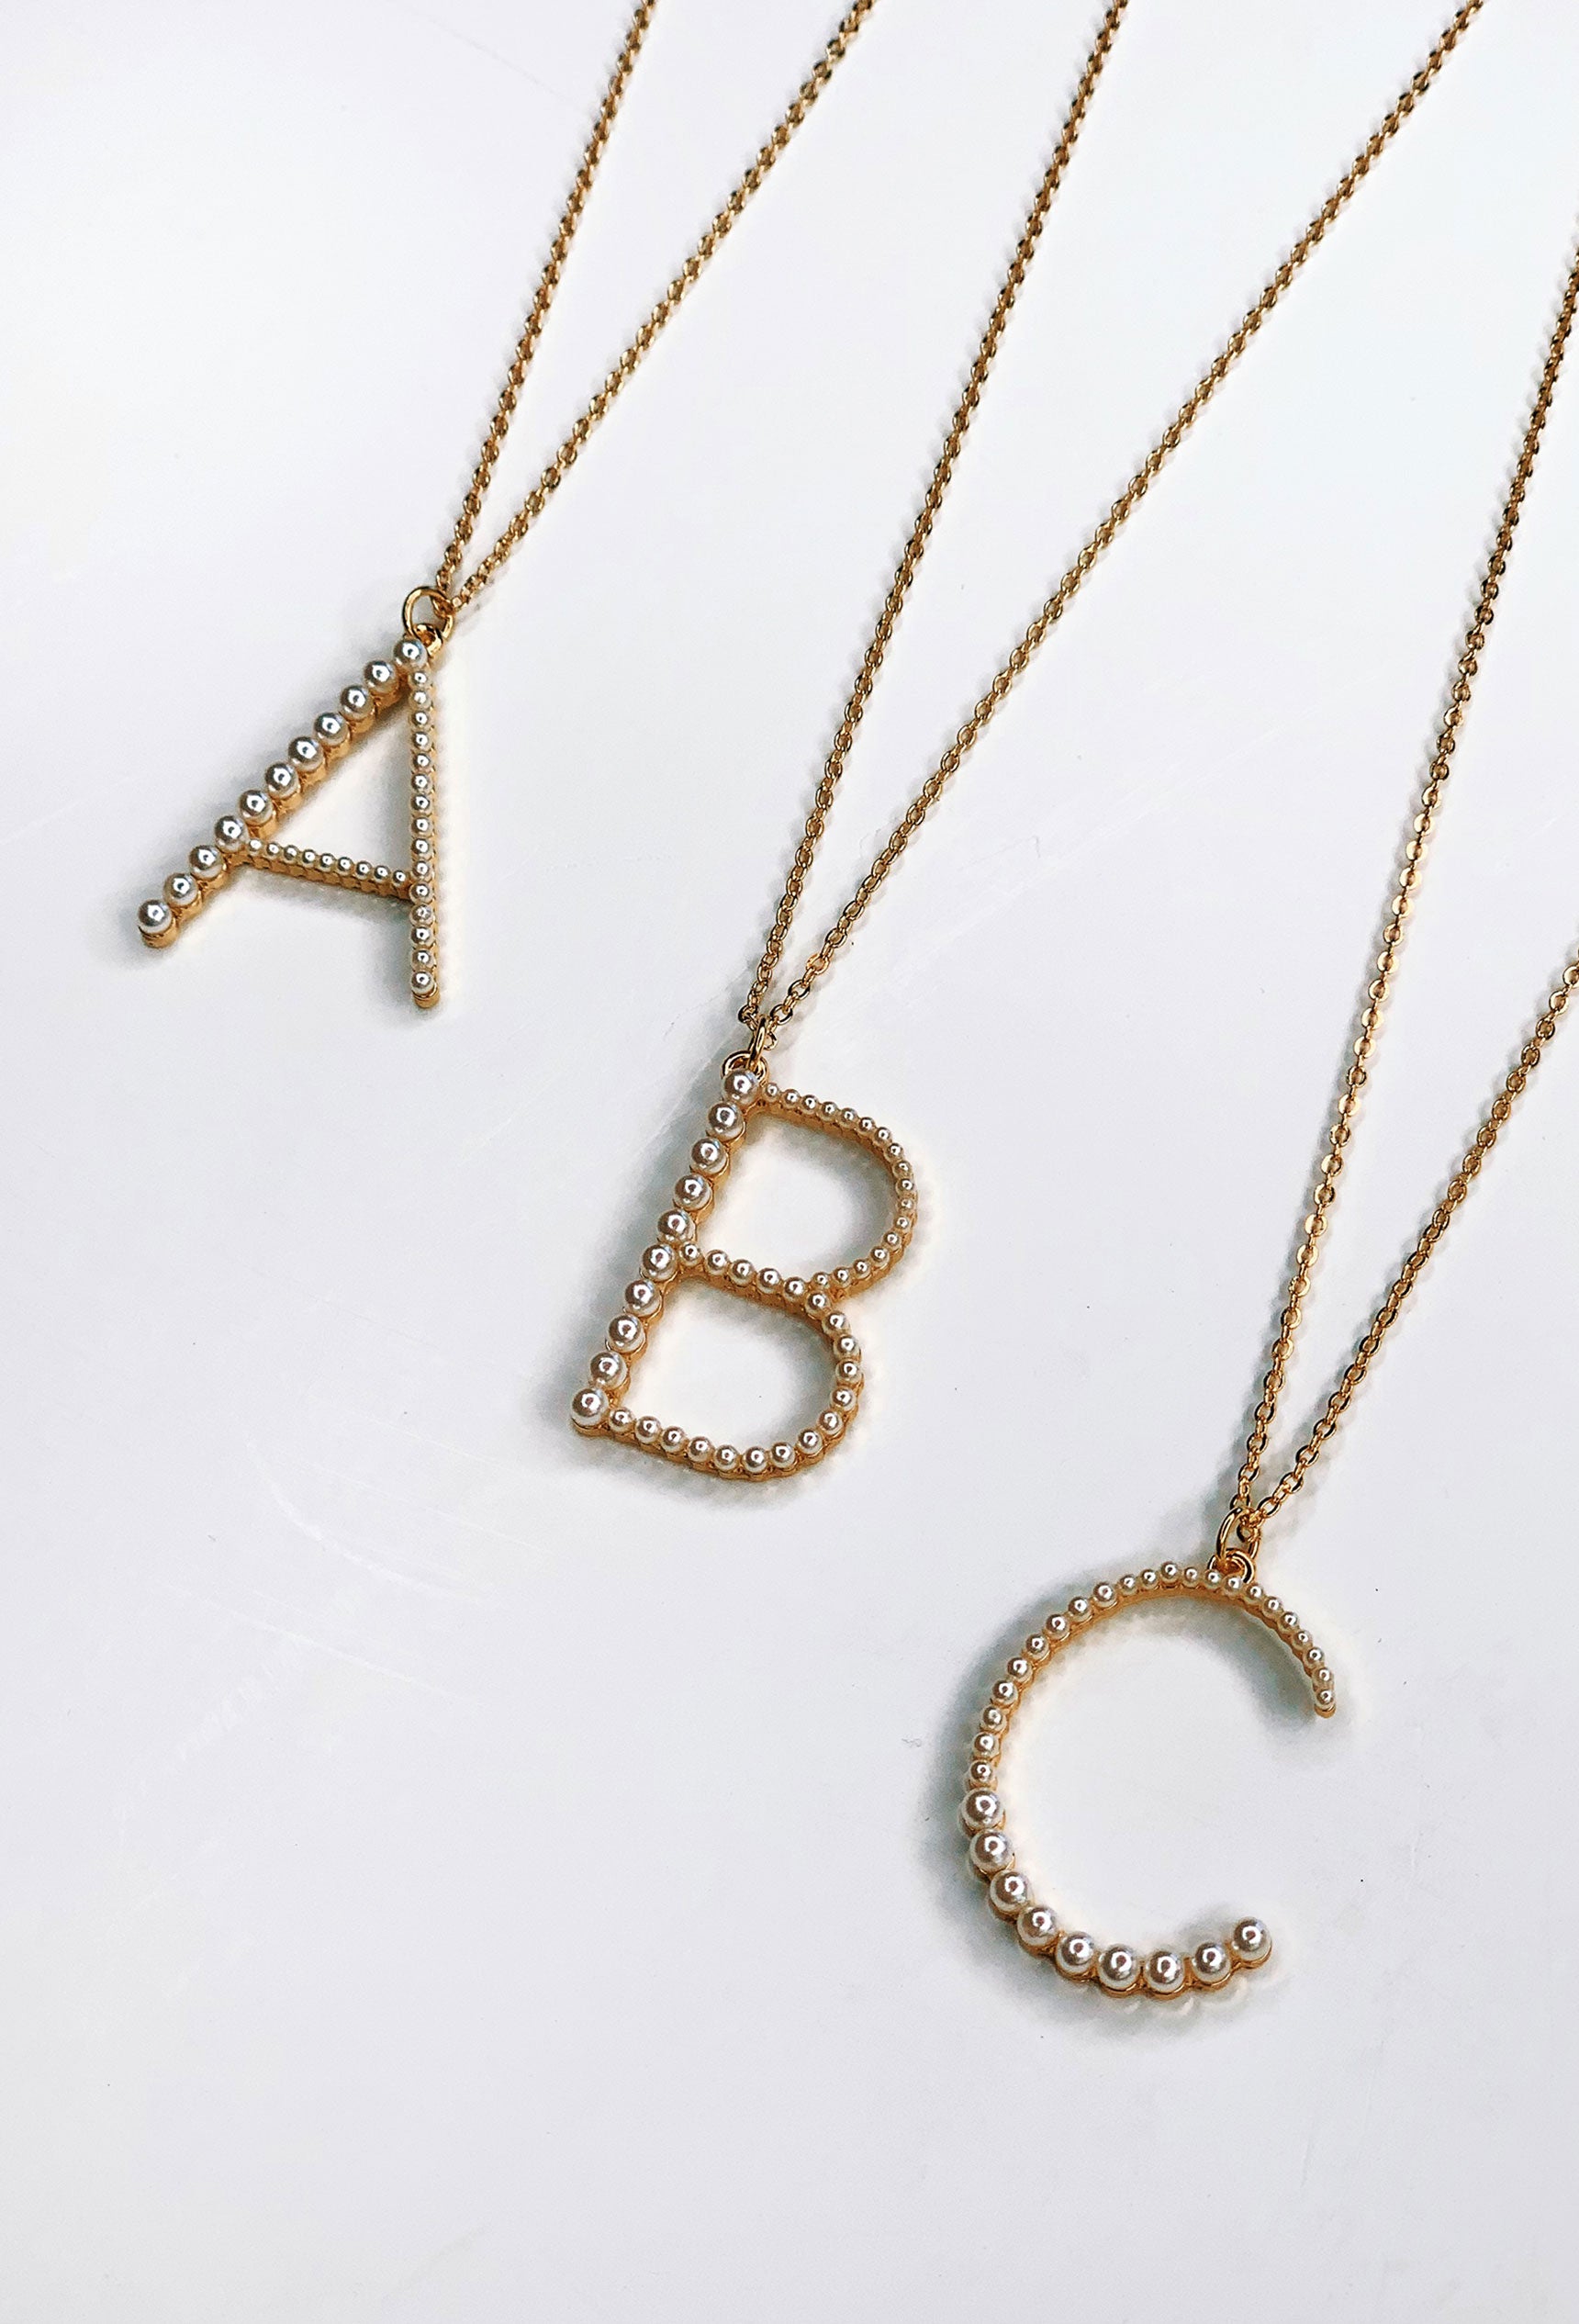 Letter B Necklace - Gold Block Letter Initial Charm